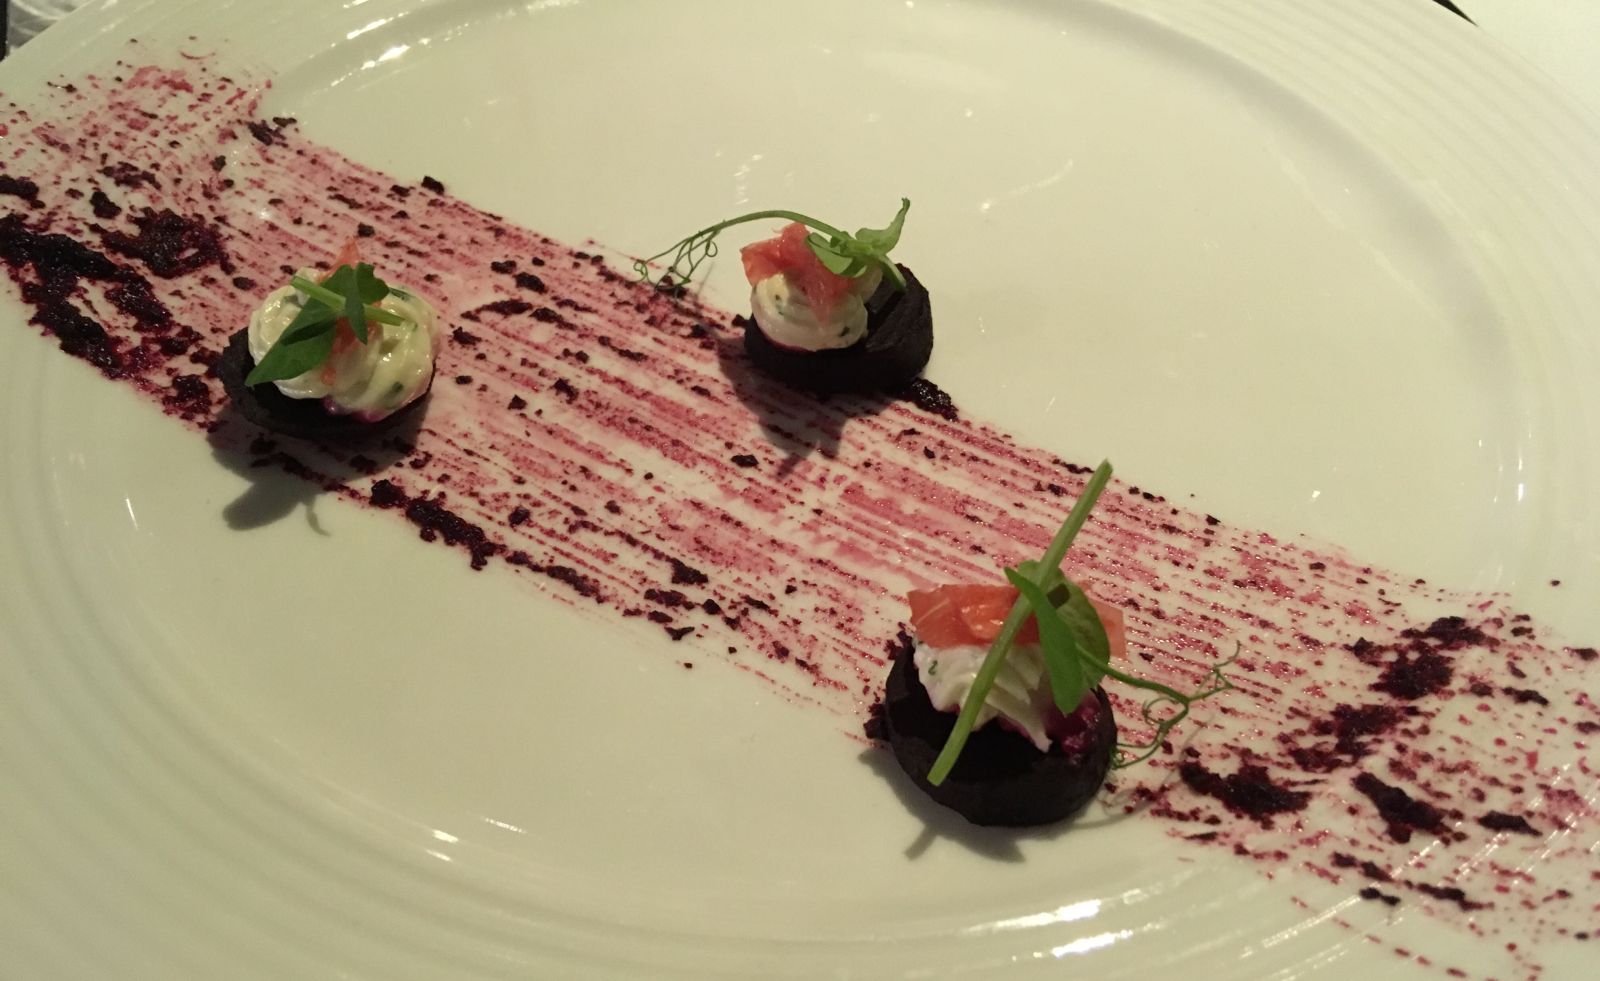 Caramelised beetroot with whipped goats cheese at Aqua Bristol.